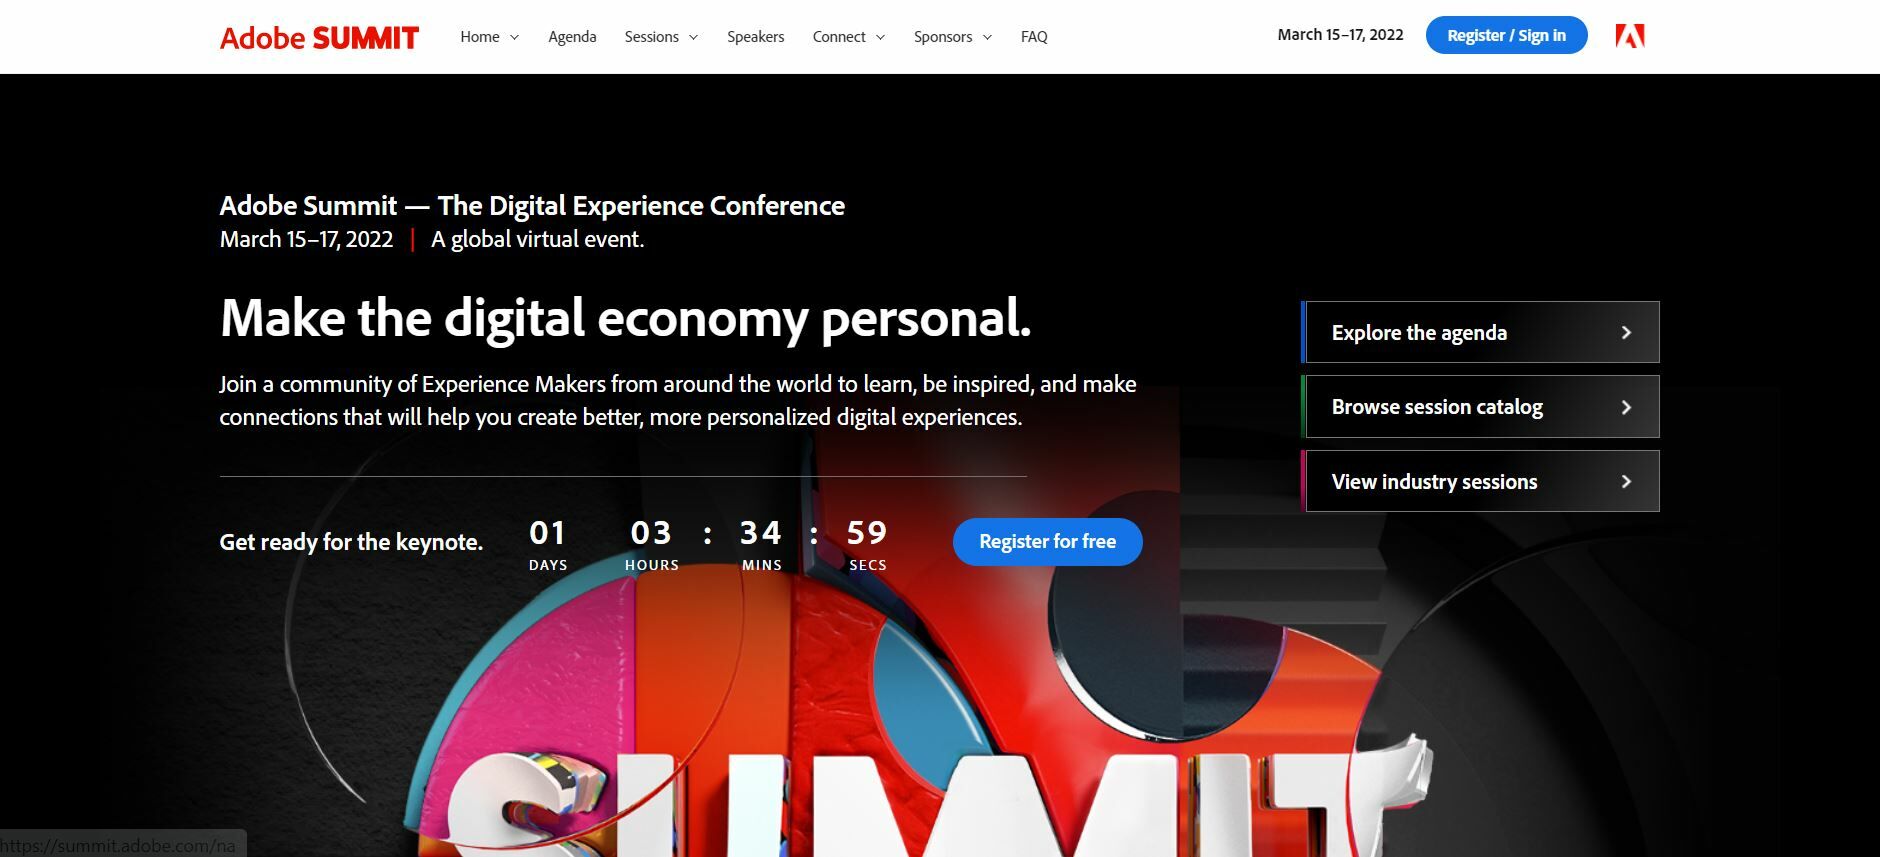 Adobe Summit: Digital Experience Conference.